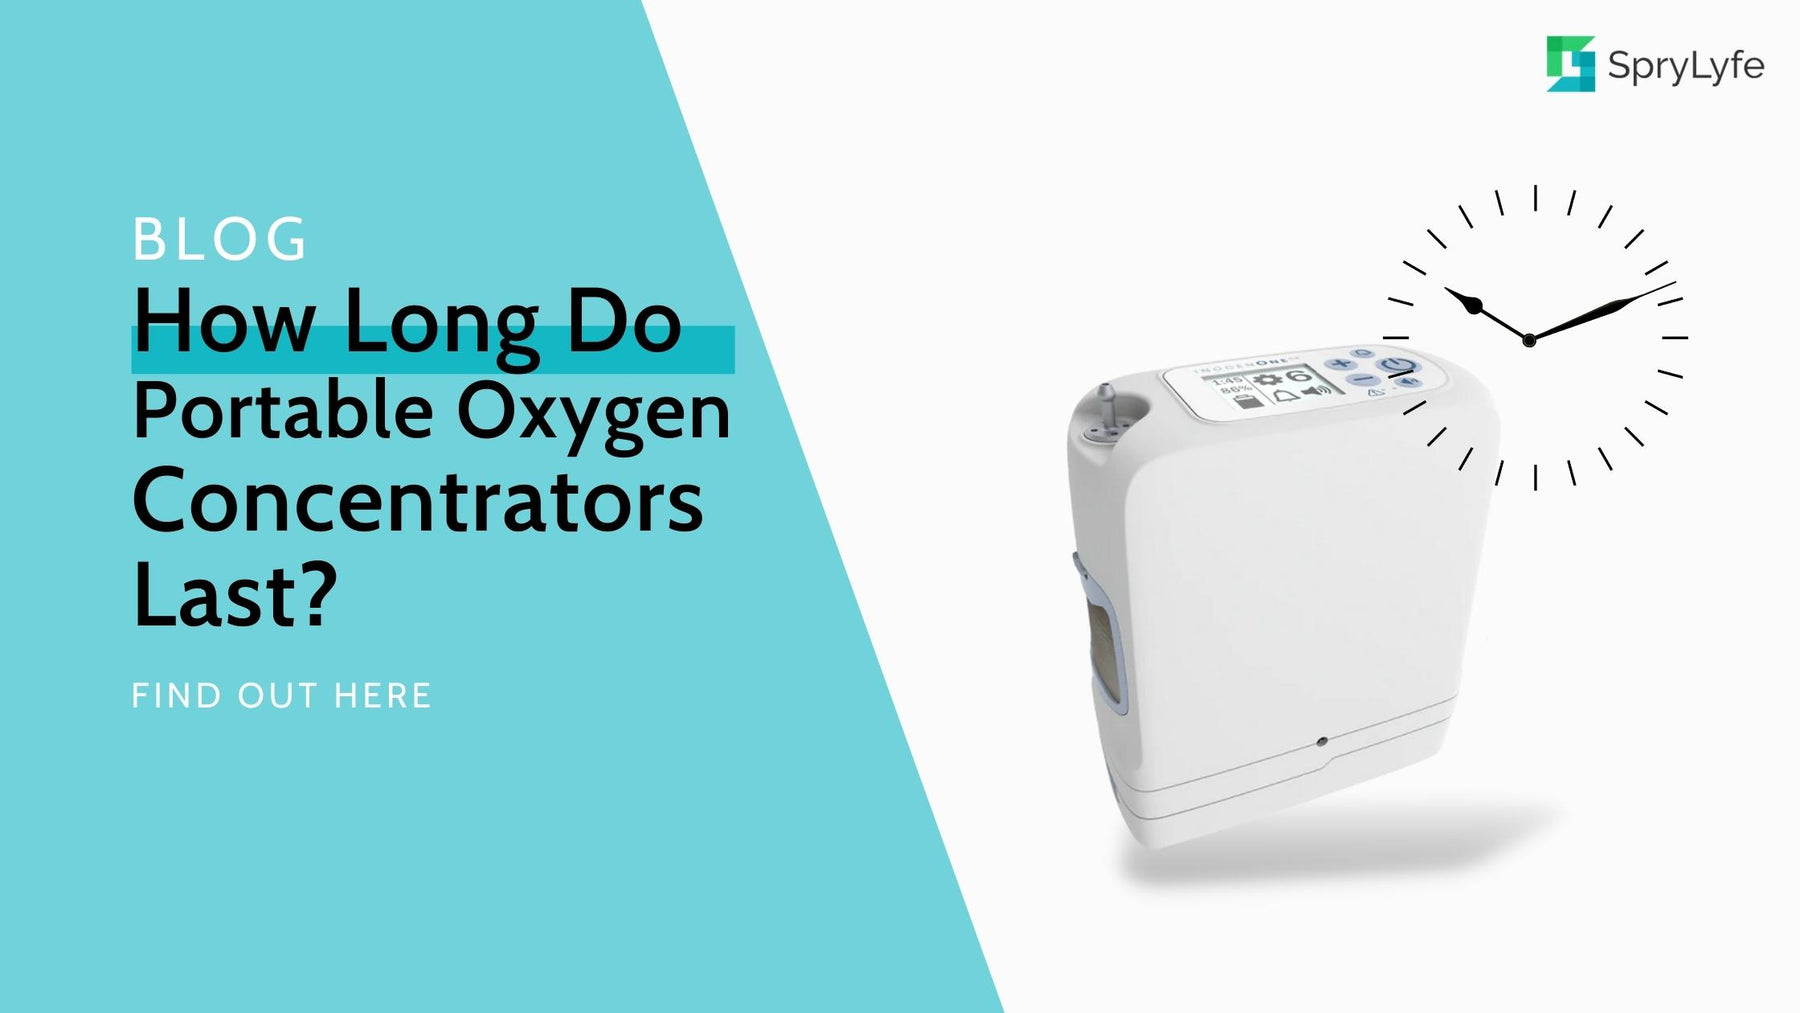 How Long Does a Portable Oxygen Concentrator Last?